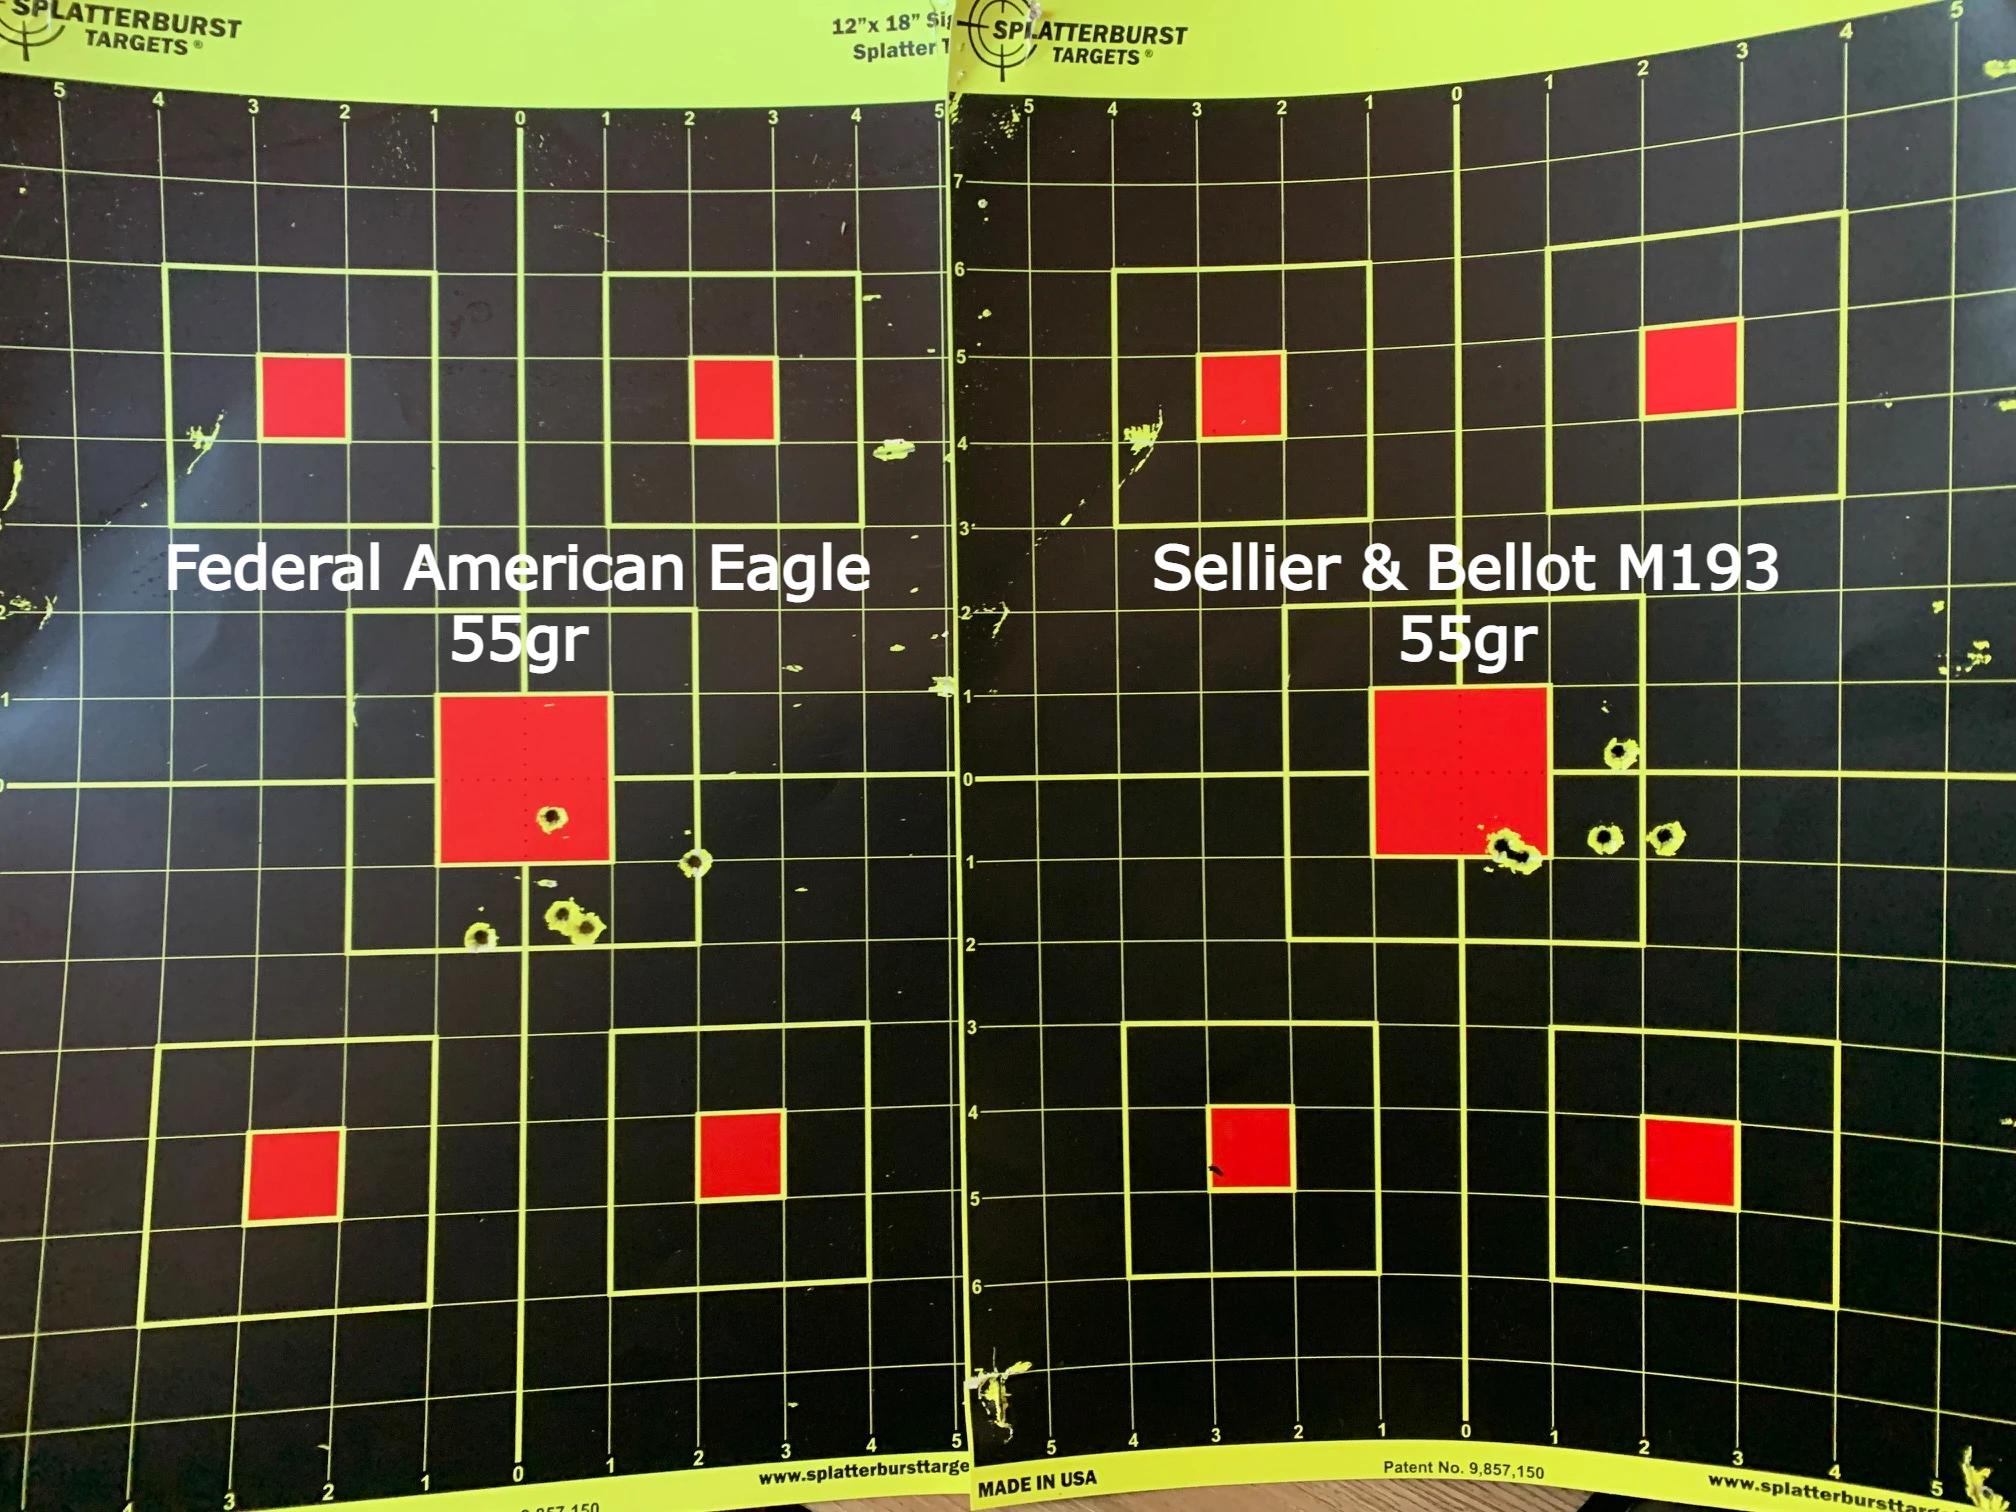 The Banish 223 put up 2-3 MOA groups, which is in-line with non-suppressed groups I normally get from the PA-15 pistol.